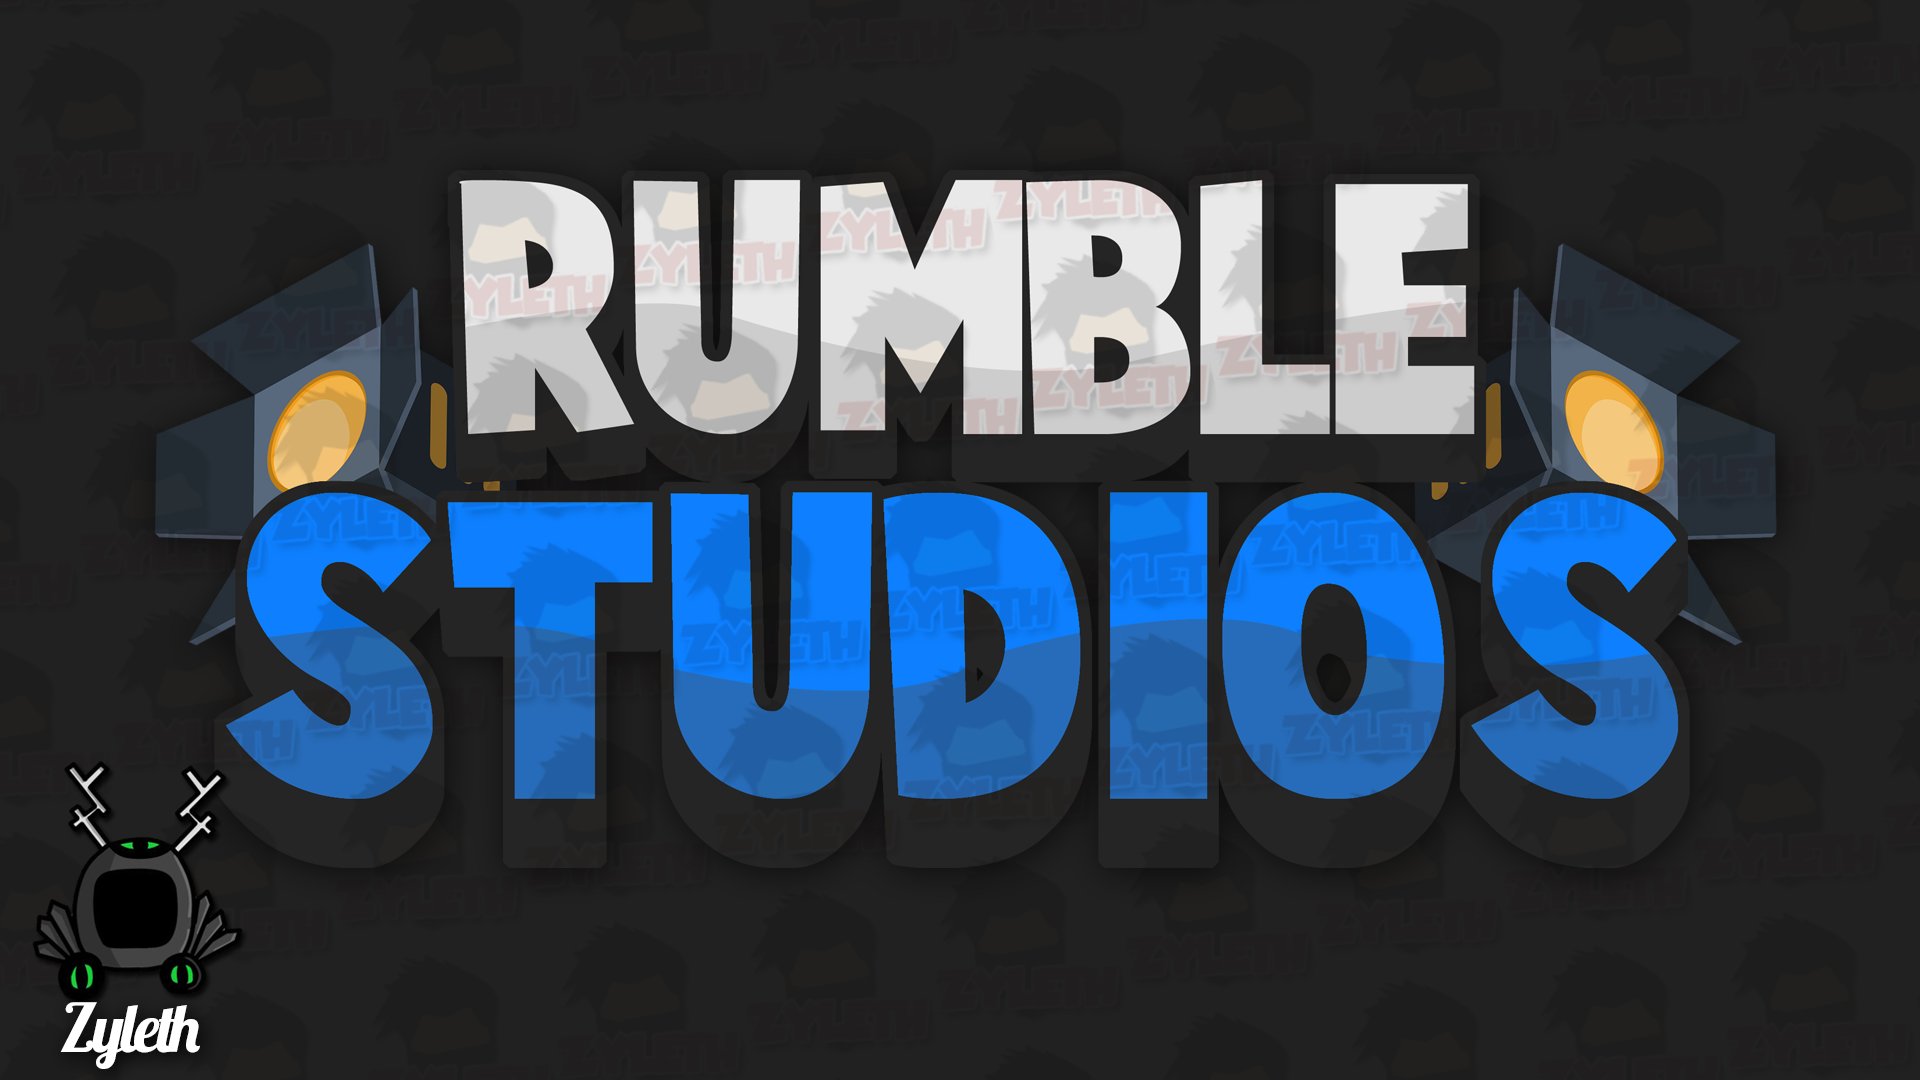 Zyleth On Twitter I Done A Quick Little Remaster Of The Rumble Studios Logo Felt Like The Old One Was Outdated Amateur And Pretty Washed Out With The Colouring Tbh I Prefer